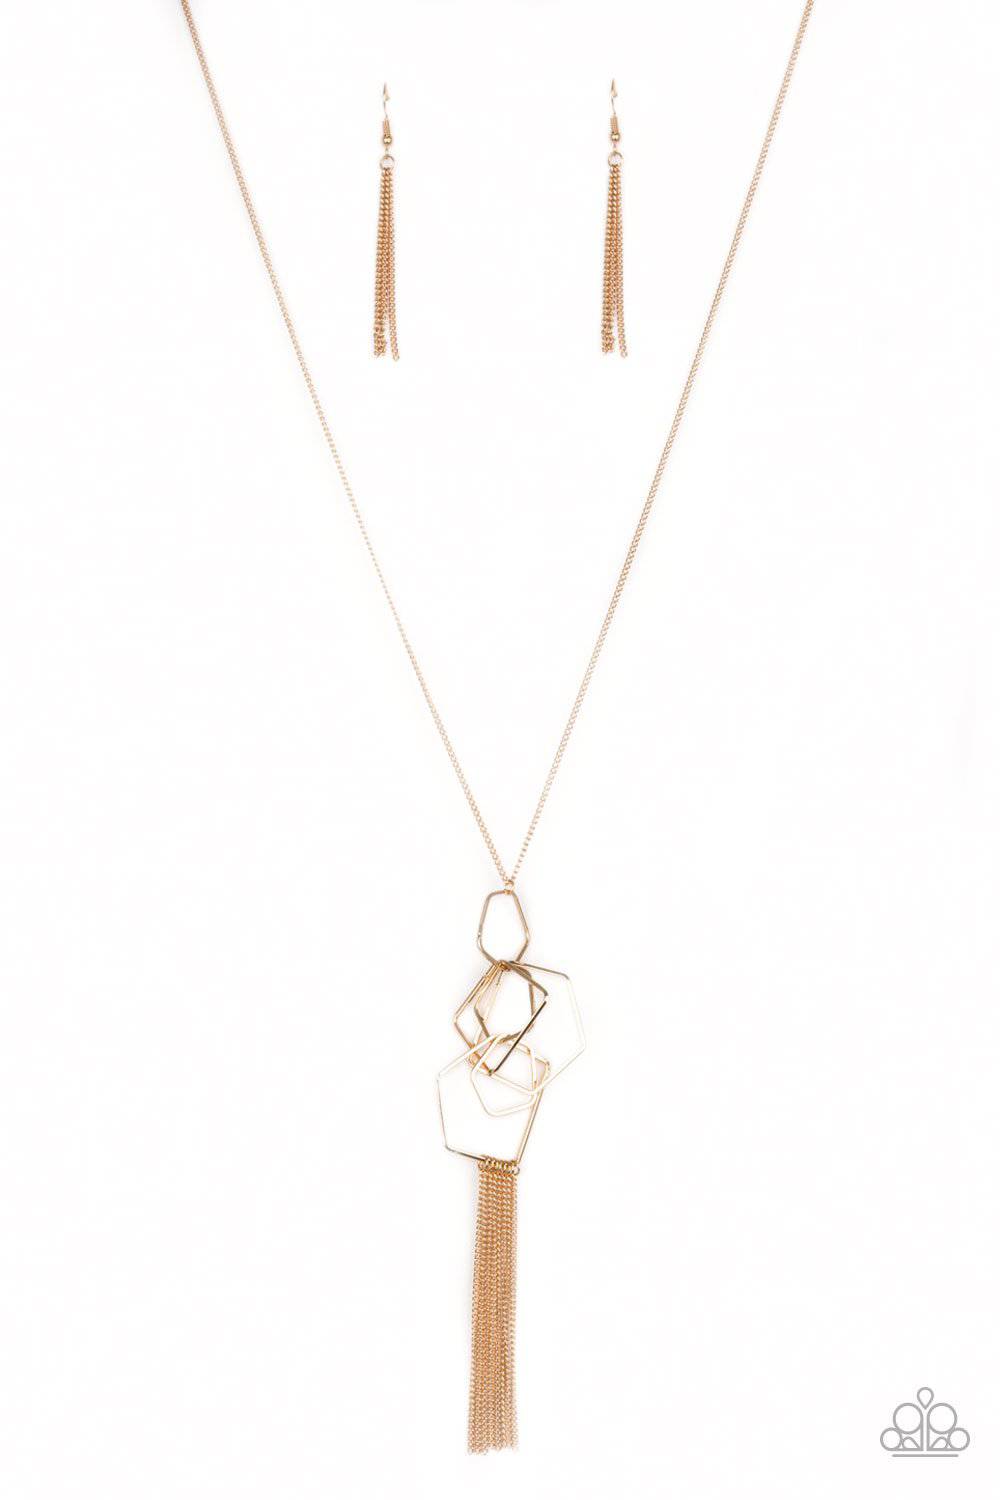 A243 - The Penthouse Gold Necklace by Paparazzi Accessories on Fancy5Fashion.com